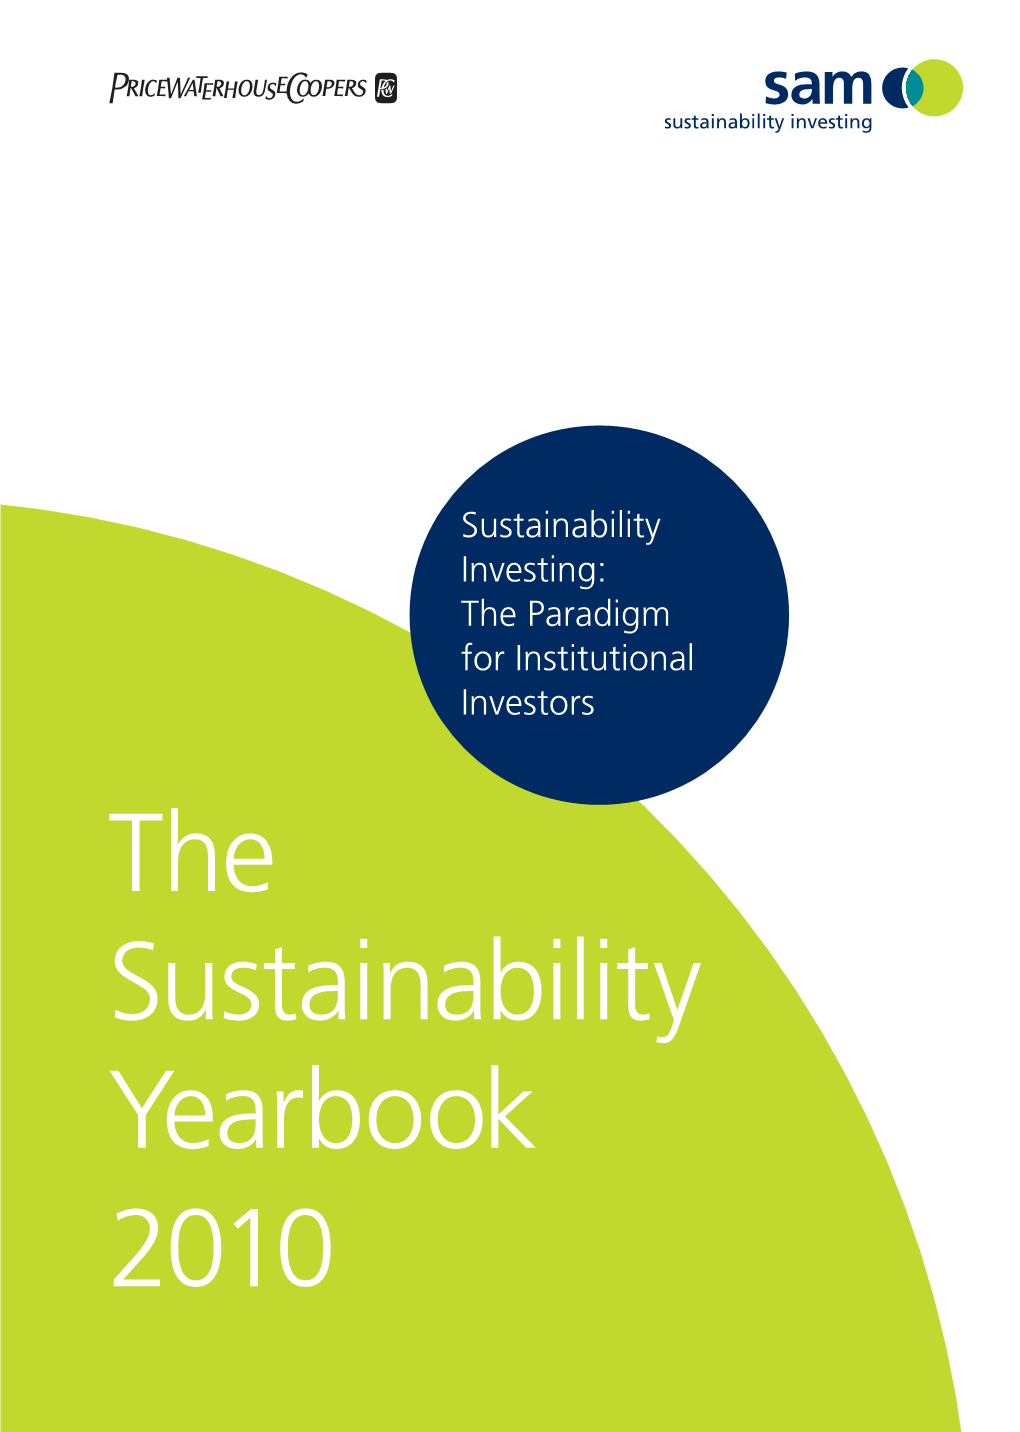 The Sustainability Yearbook 2010 the Sustainability Yearbook 2010